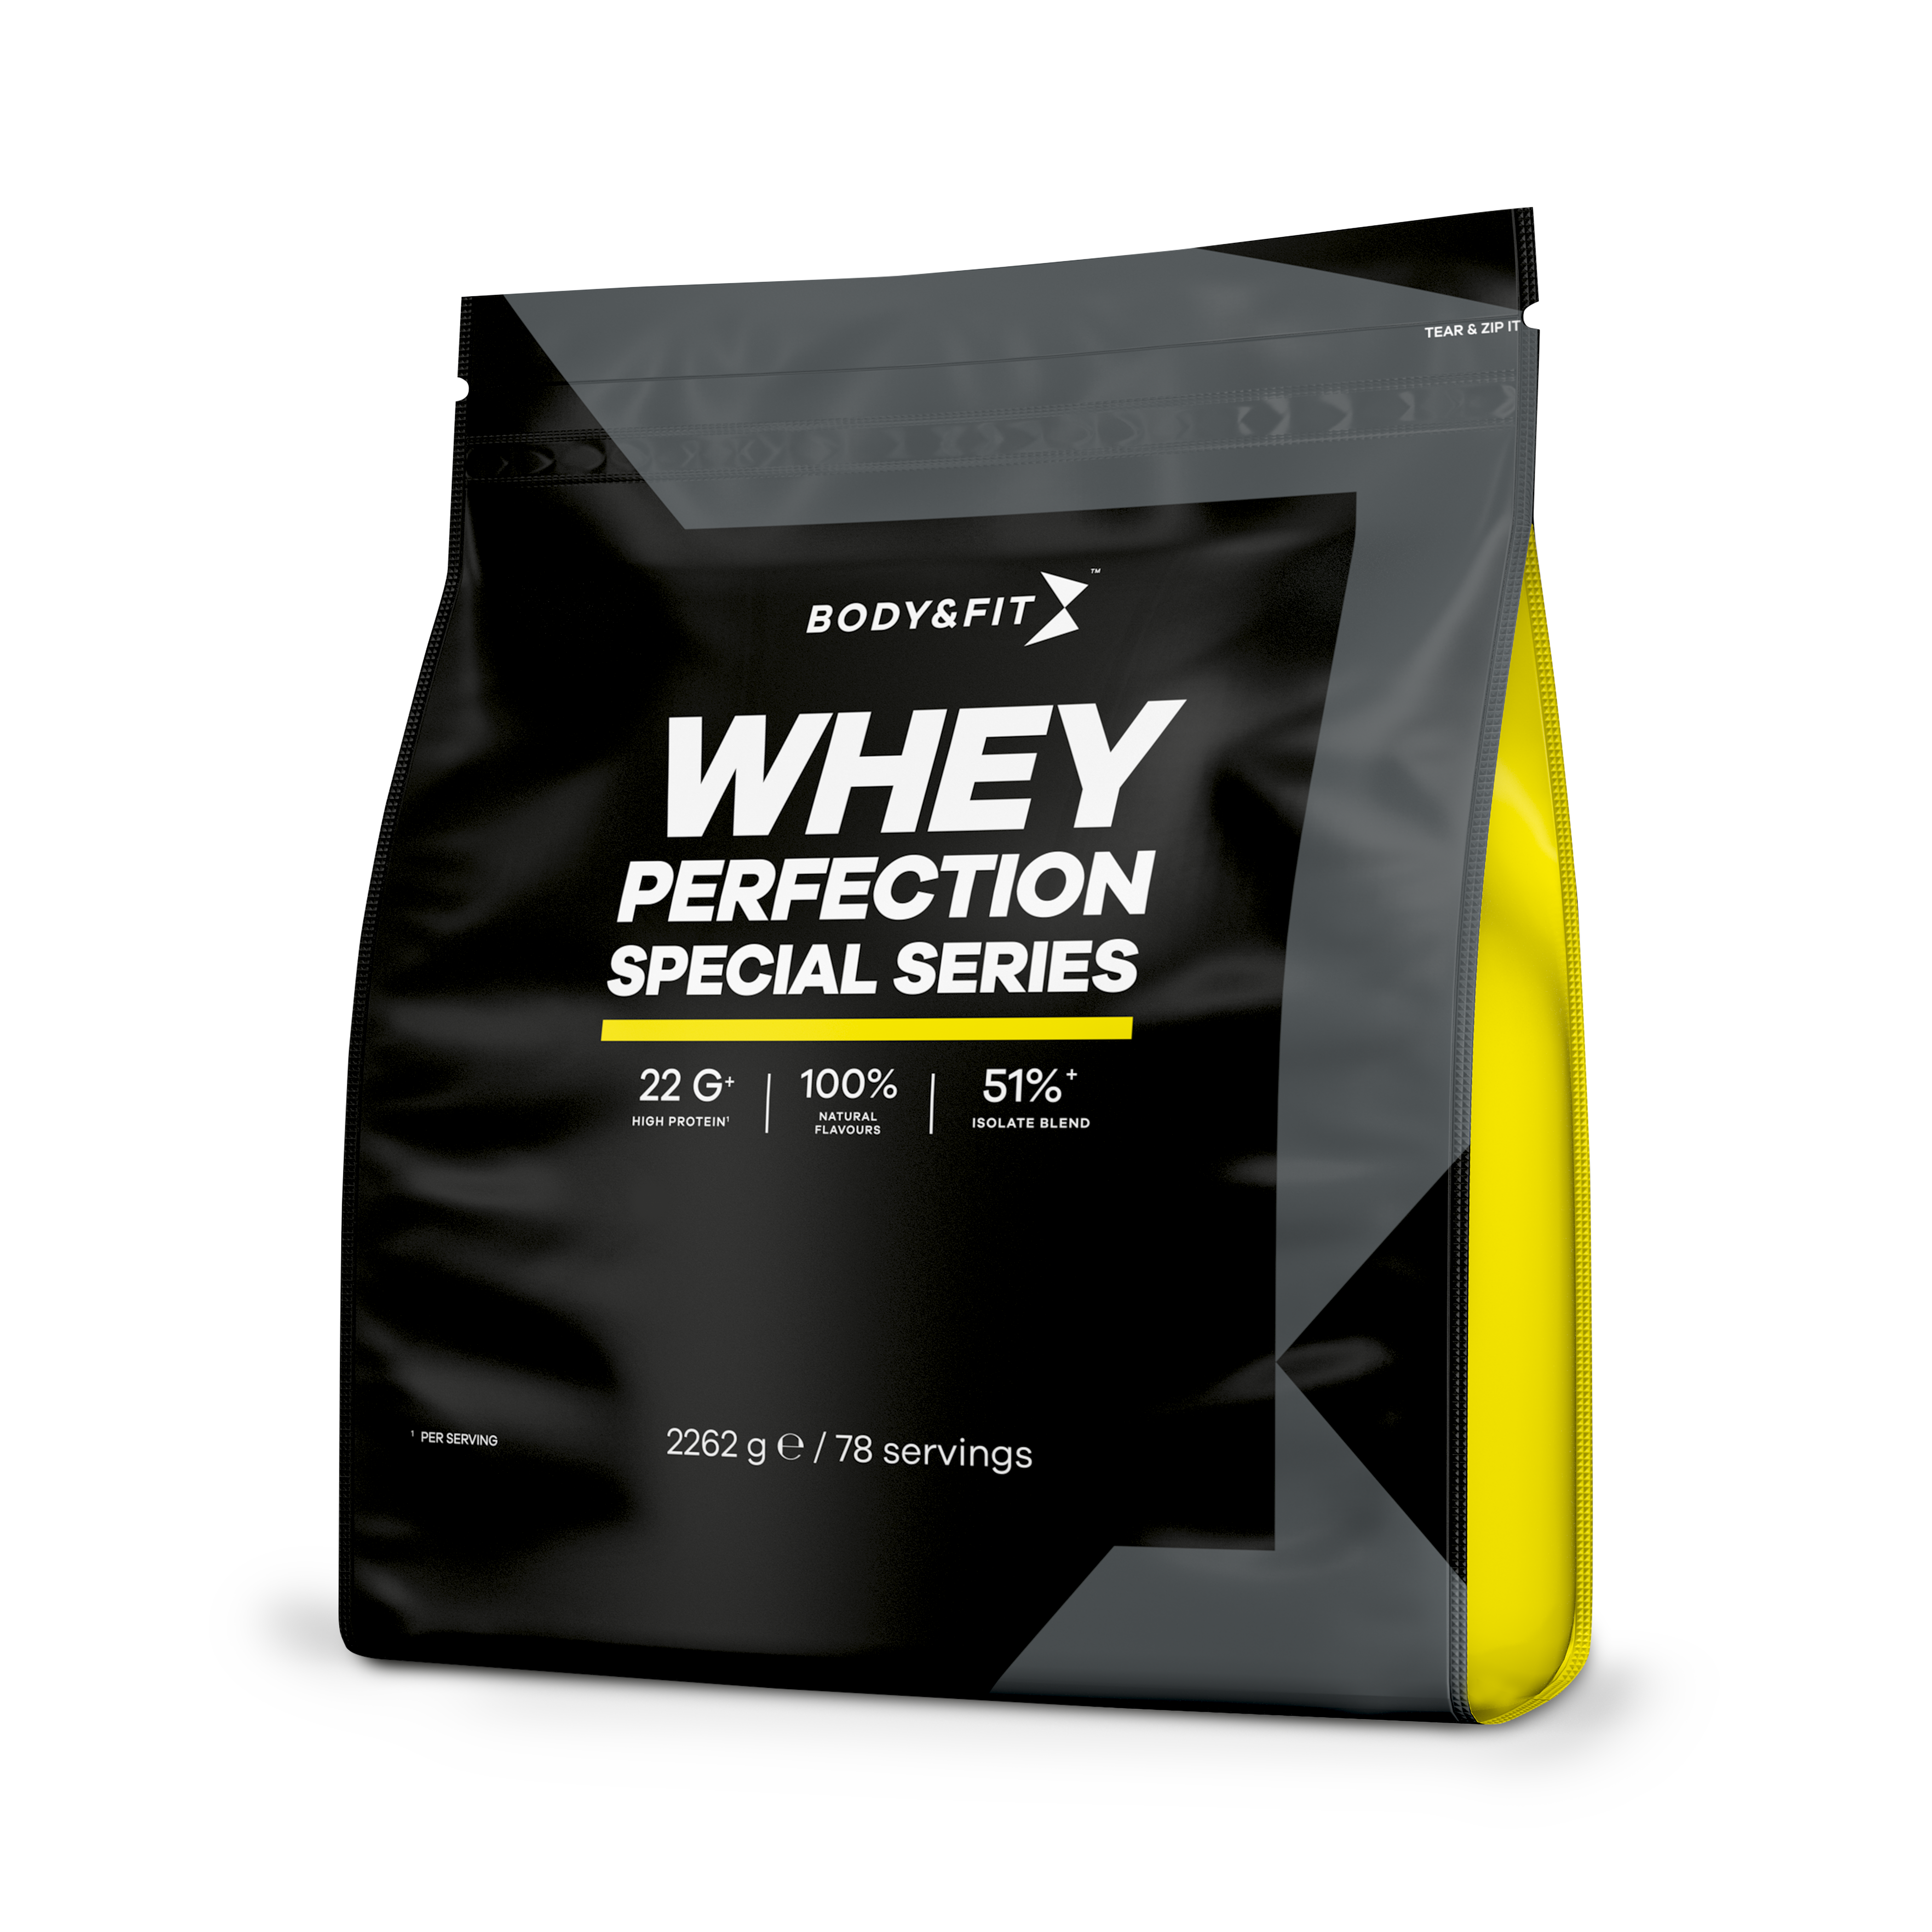 Whey Perfection - Special Series